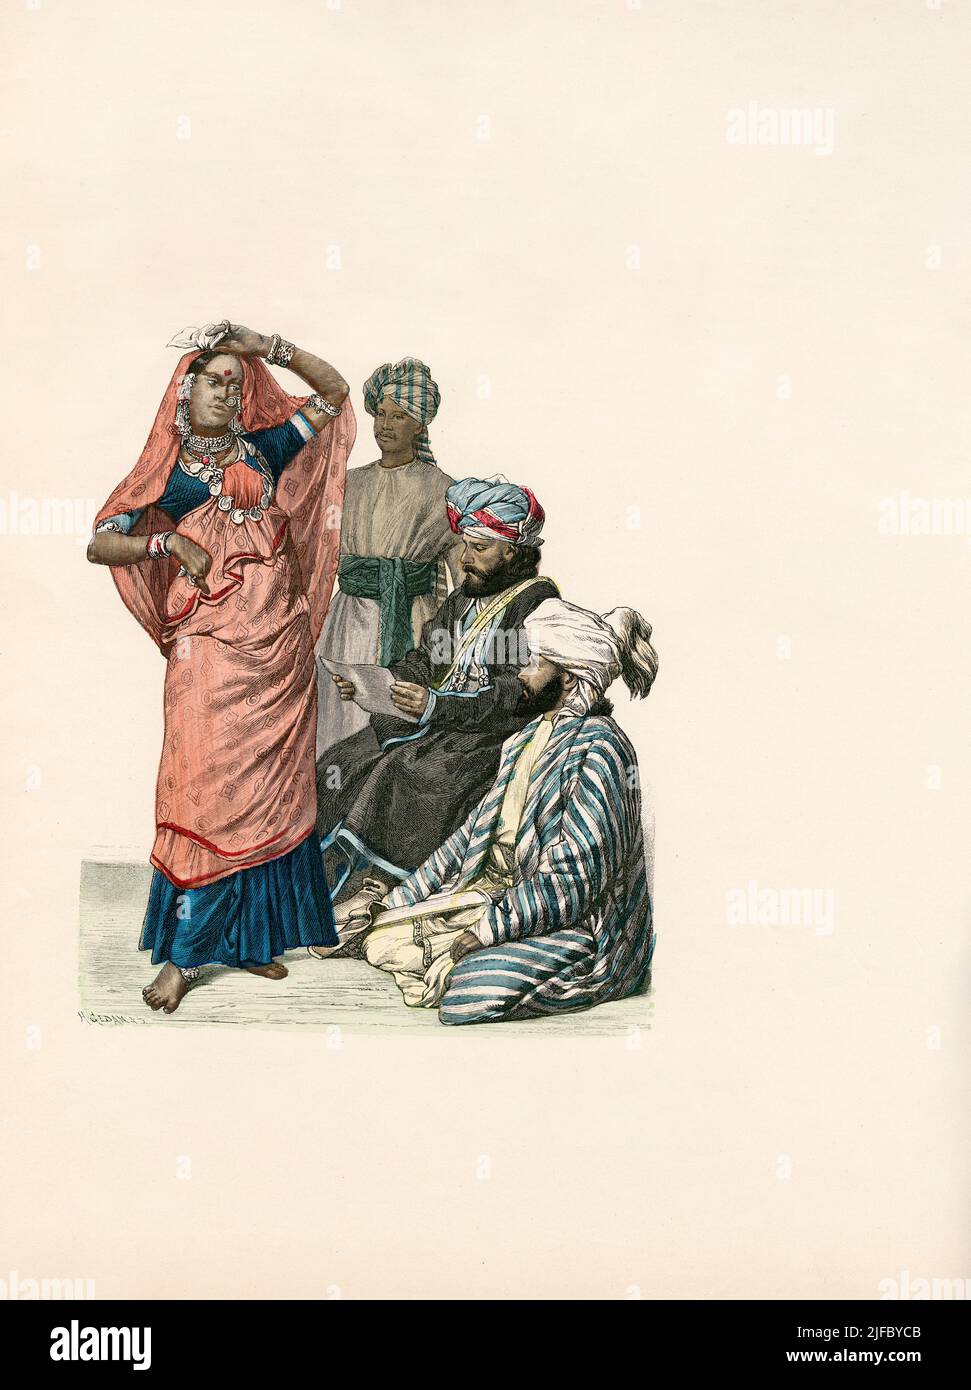 Indian Dancing Girl, Afghans, Afghanistan, late 19th Century, Illustration, The History of Costume, Braun & Schneider, Munich, Germany, 1861-1880 Stock Photo